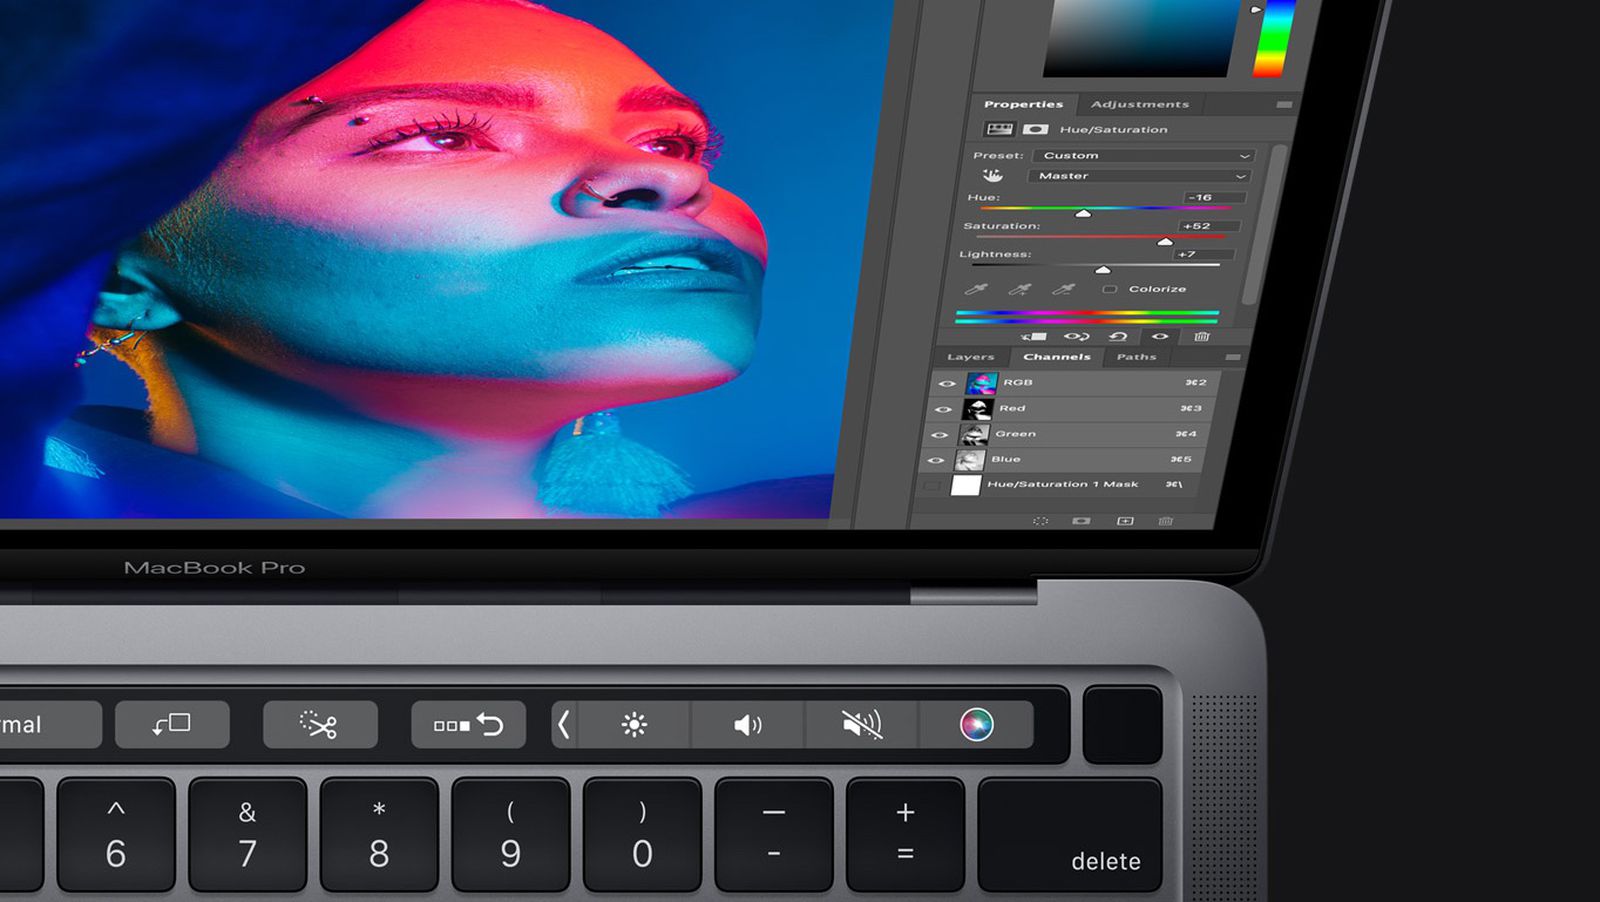 2017 MacBook Pro Models With Touch Bar Added to Apple's Vintage Products List